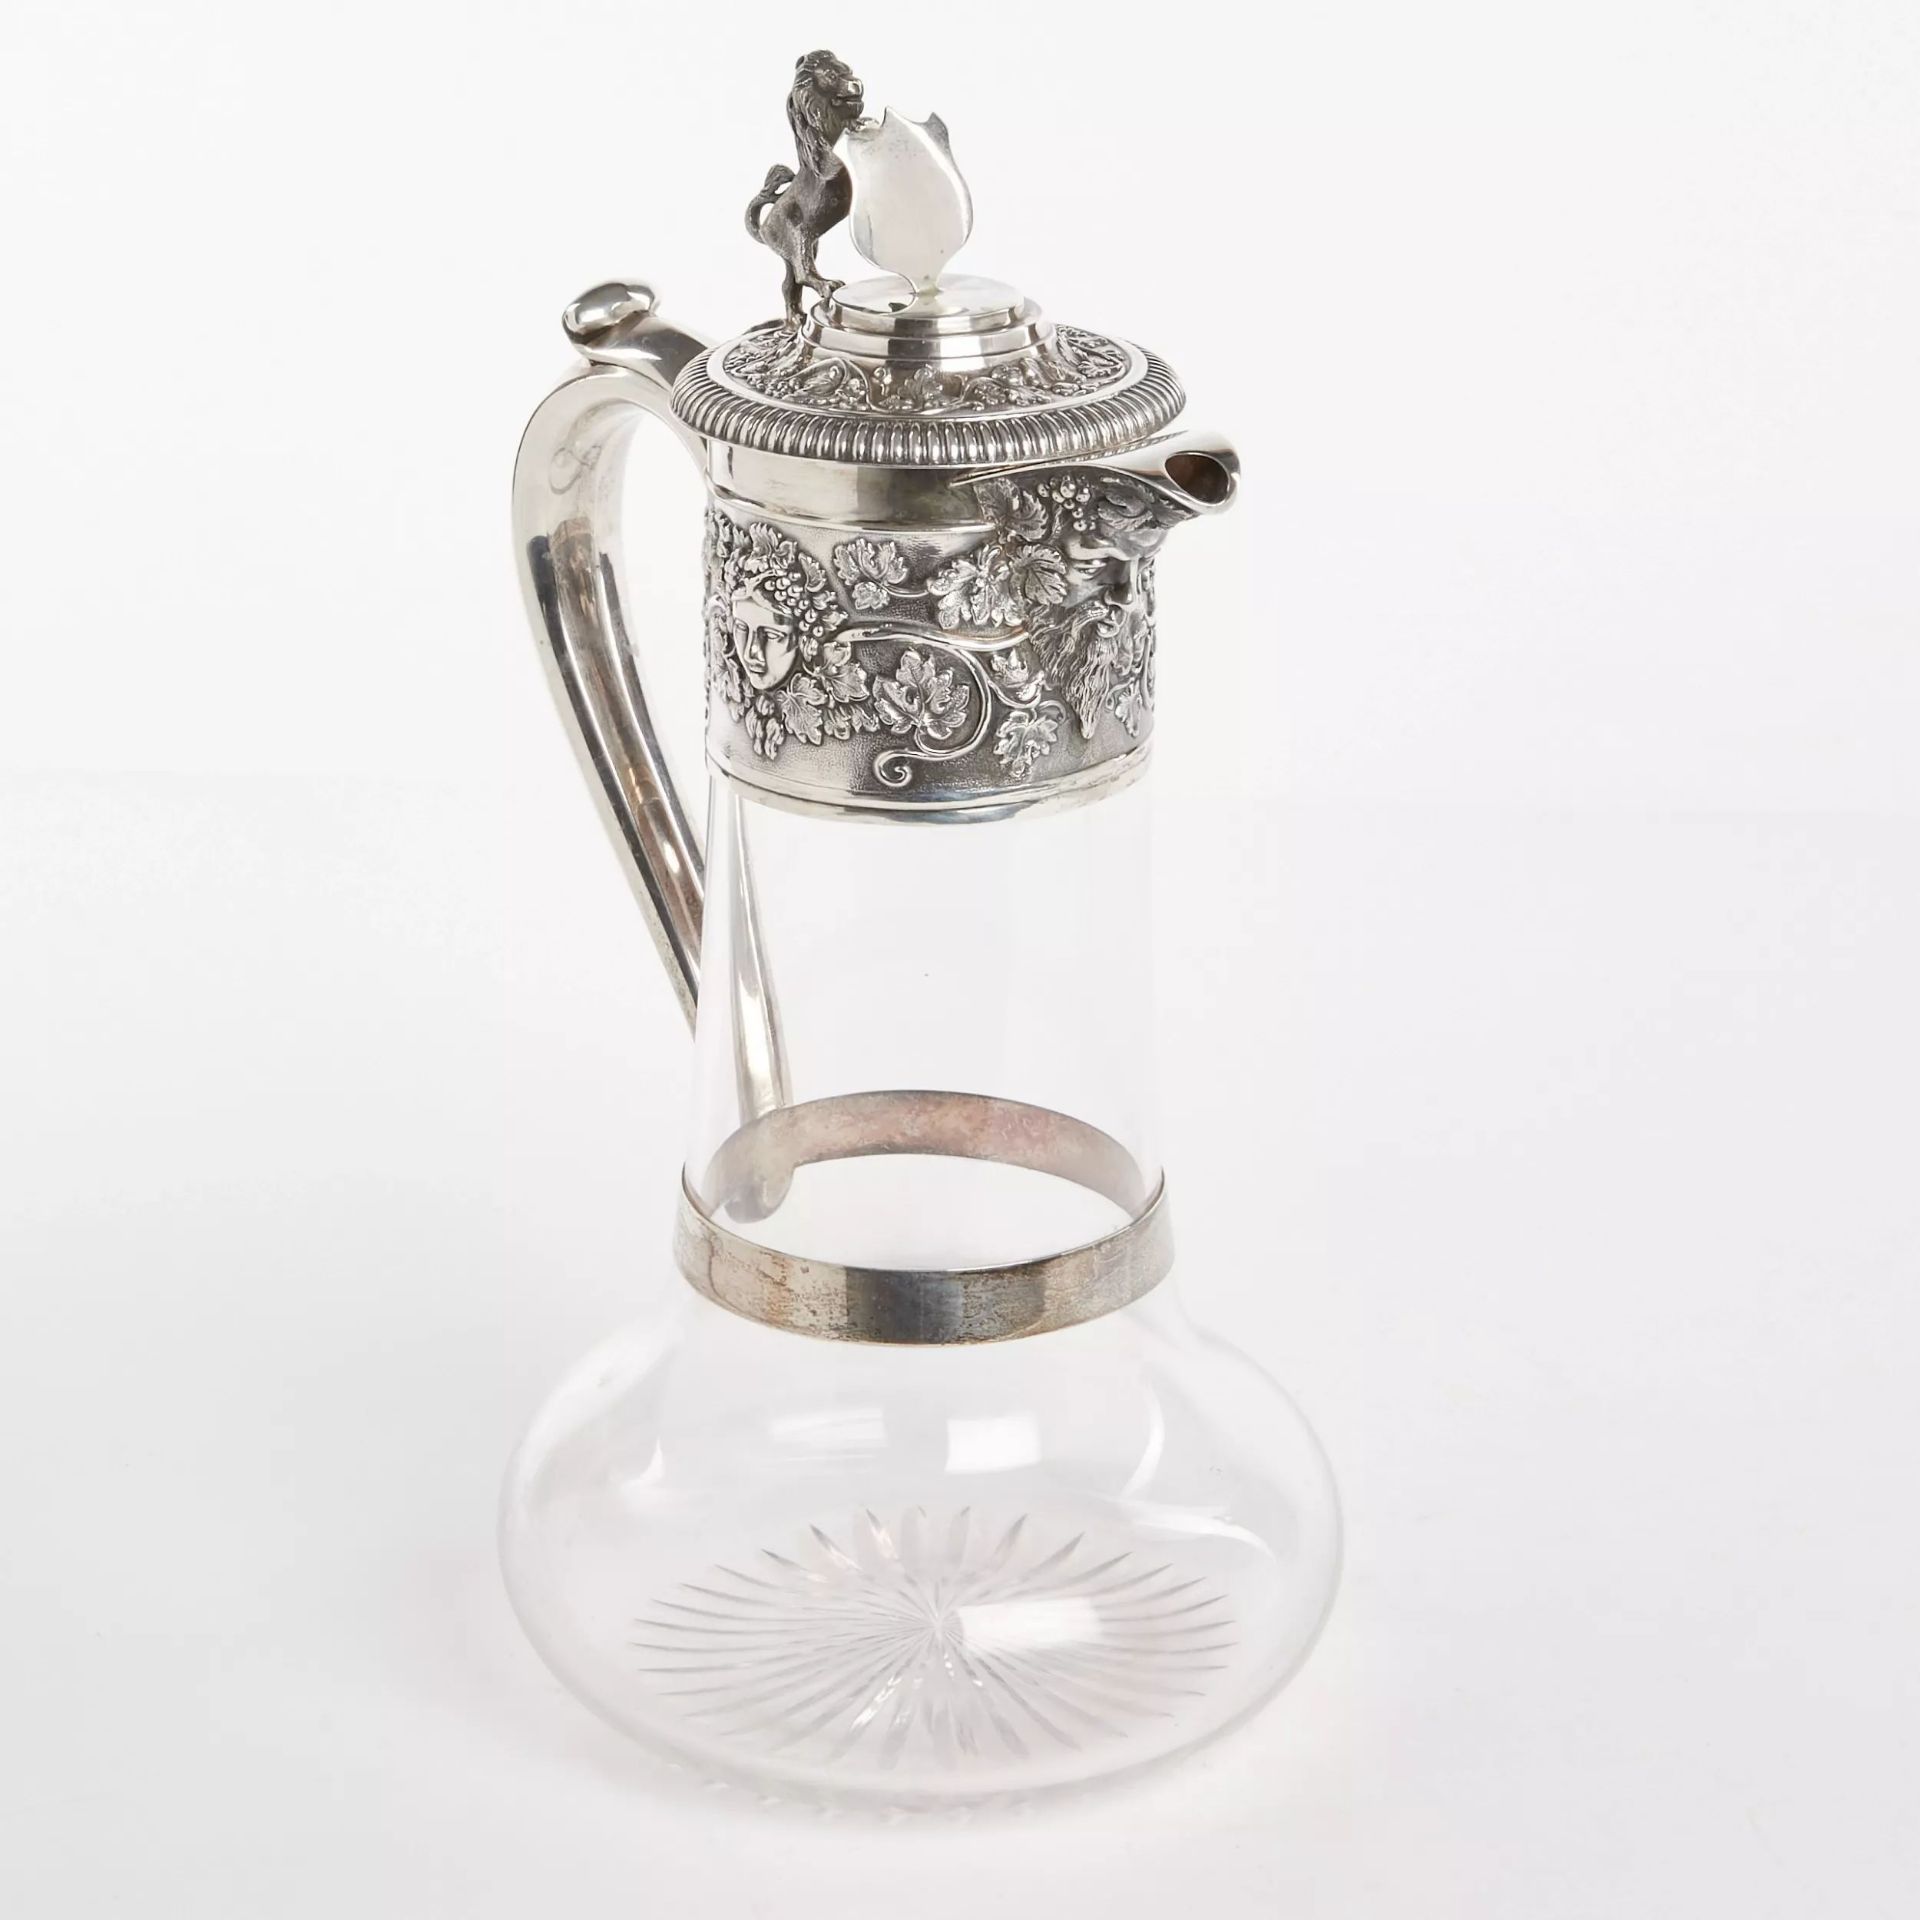 Silver Wine Jug with Glass Horace Woodward & Hugh Taylor, London 1893.